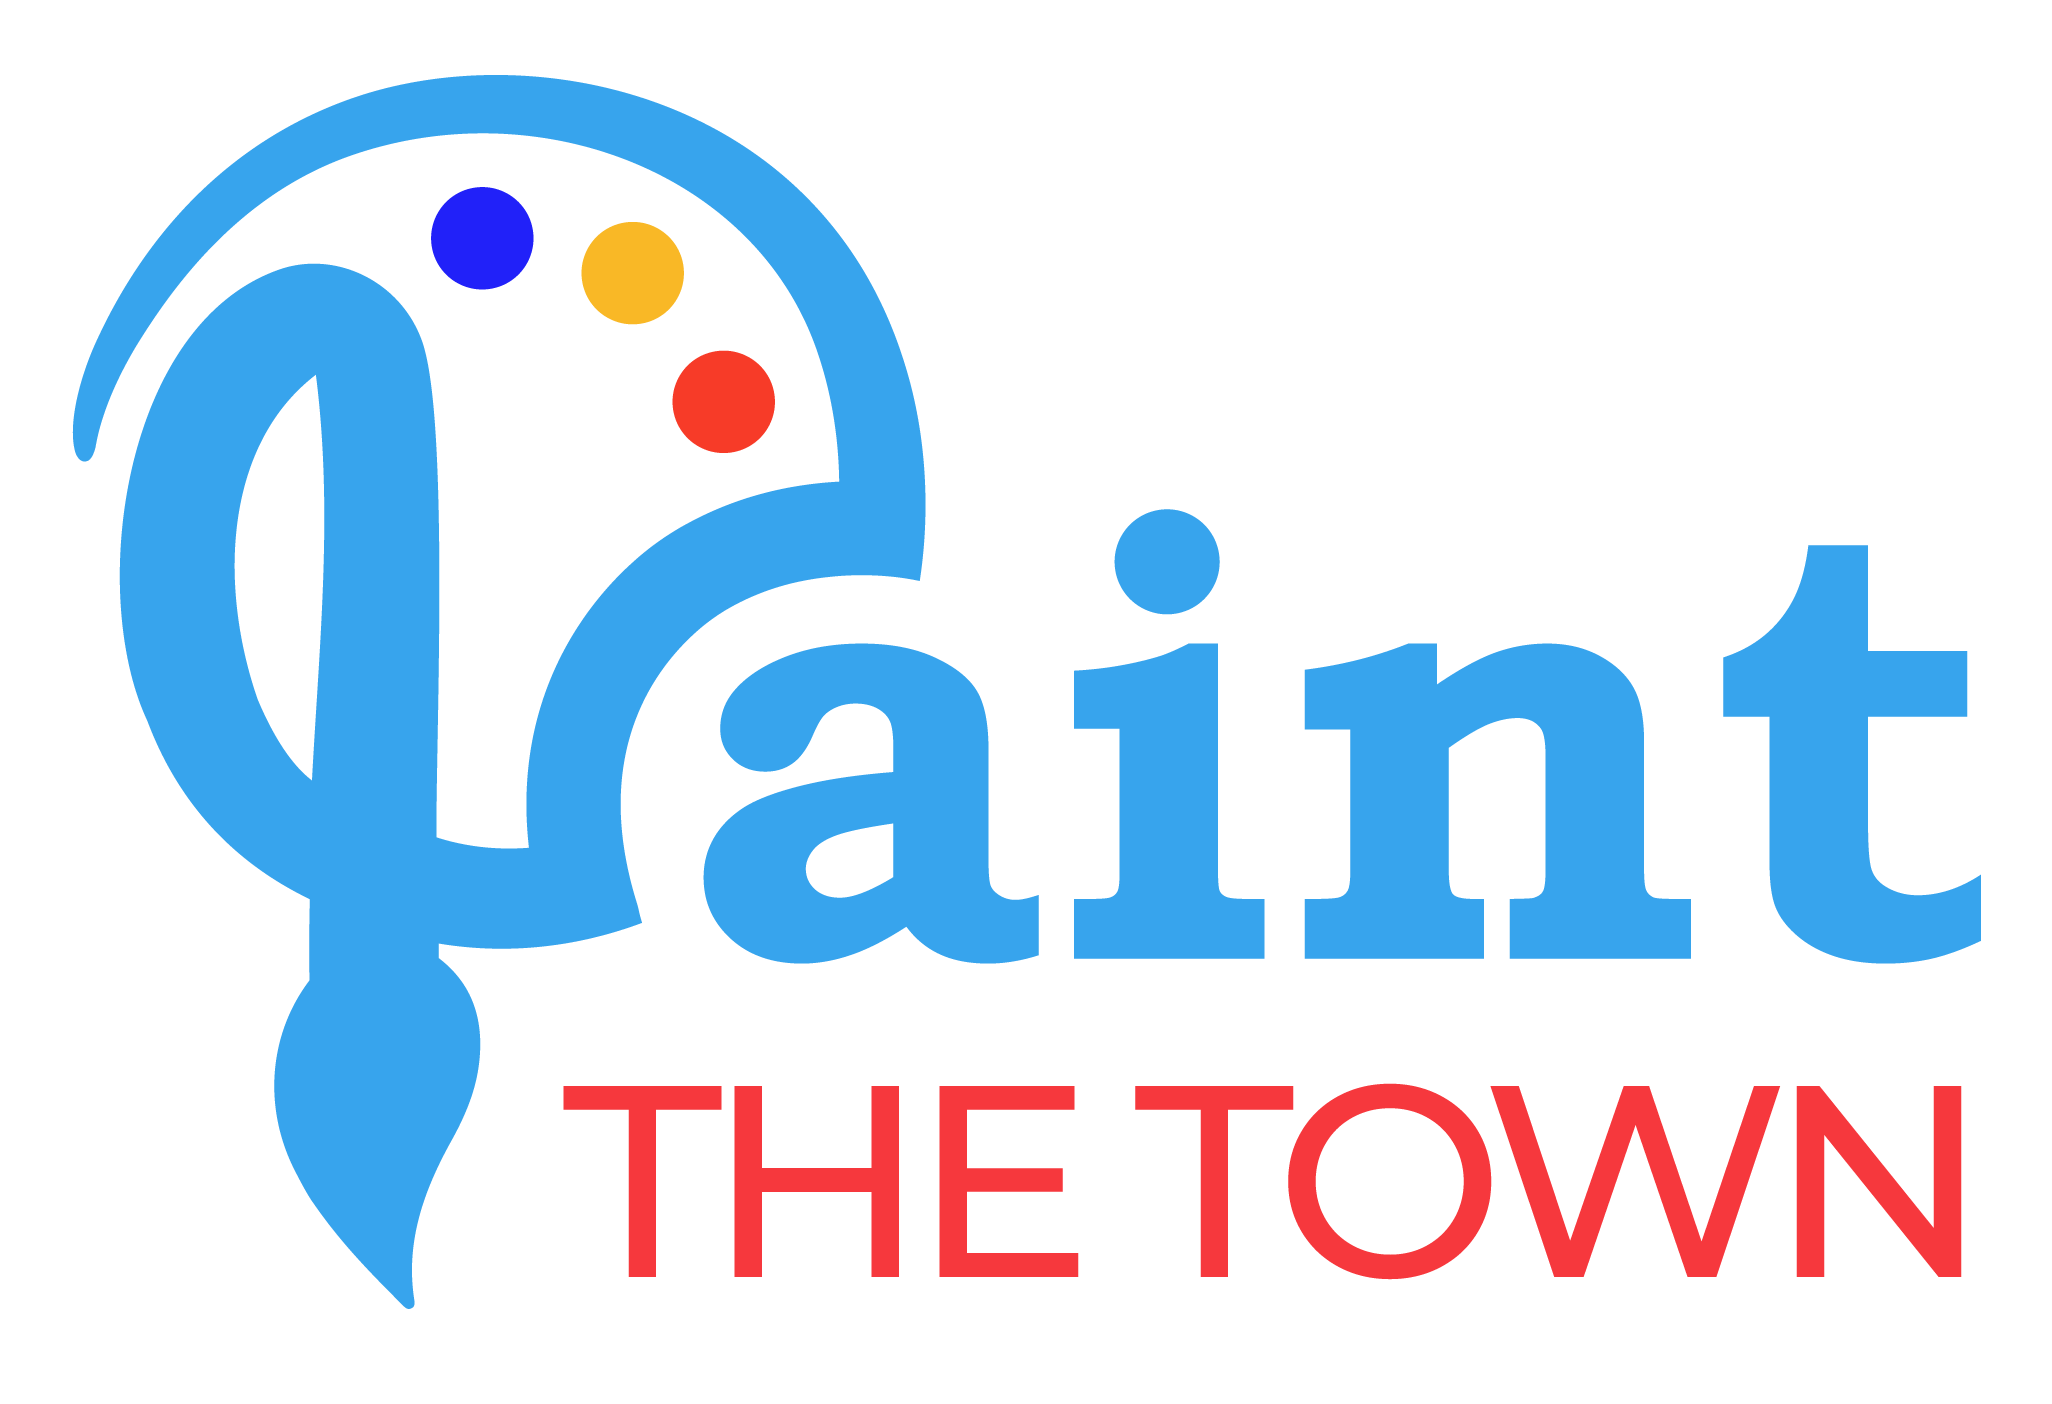 Paint The Town